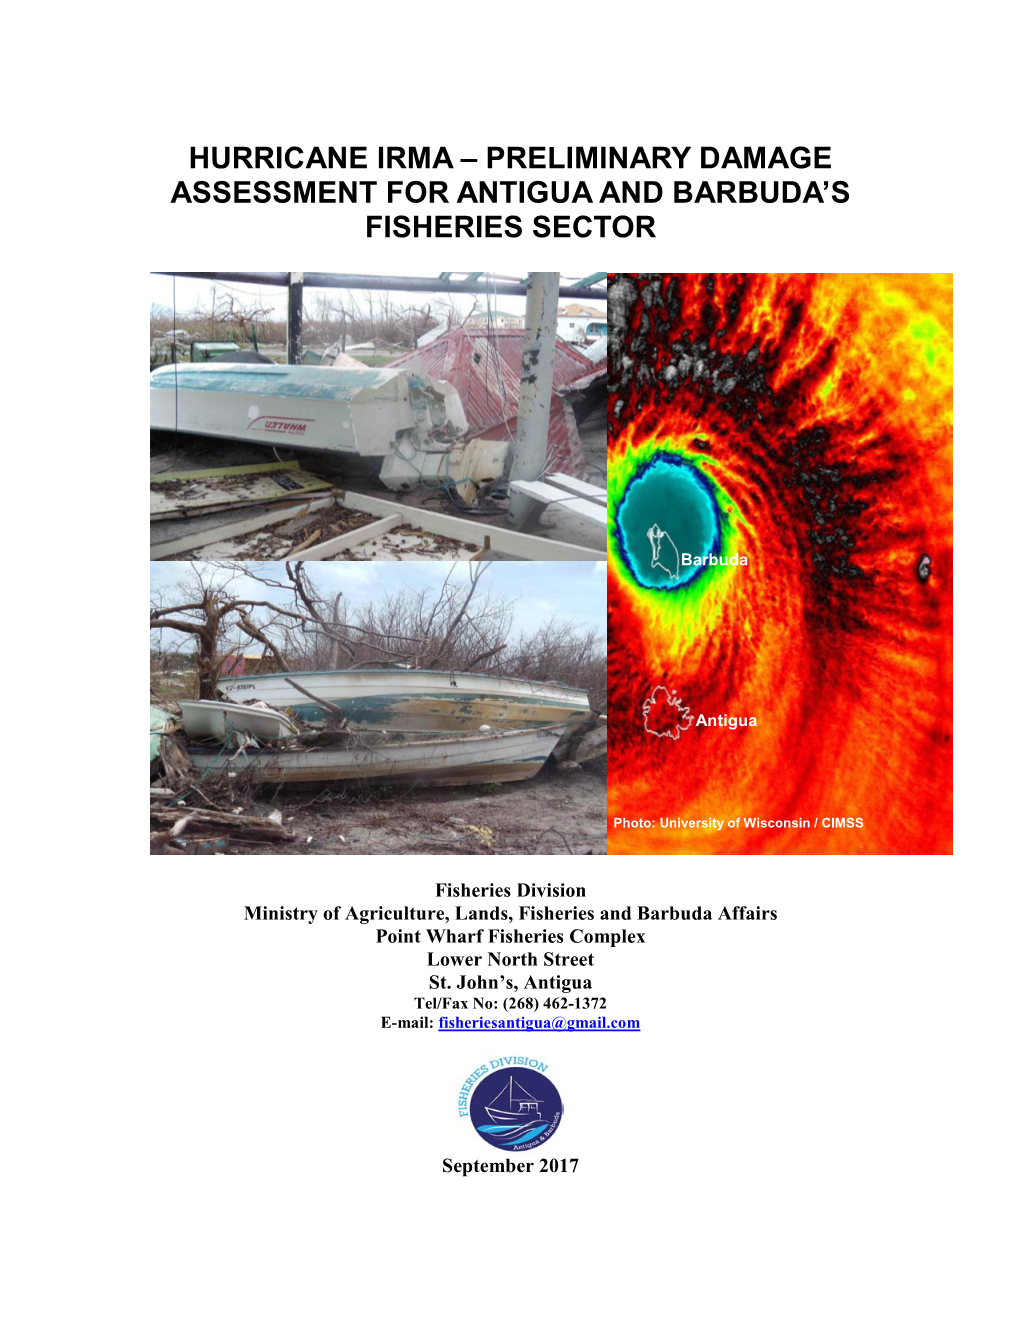 Preliminary Damage Assessment for Antigua and Barbuda's